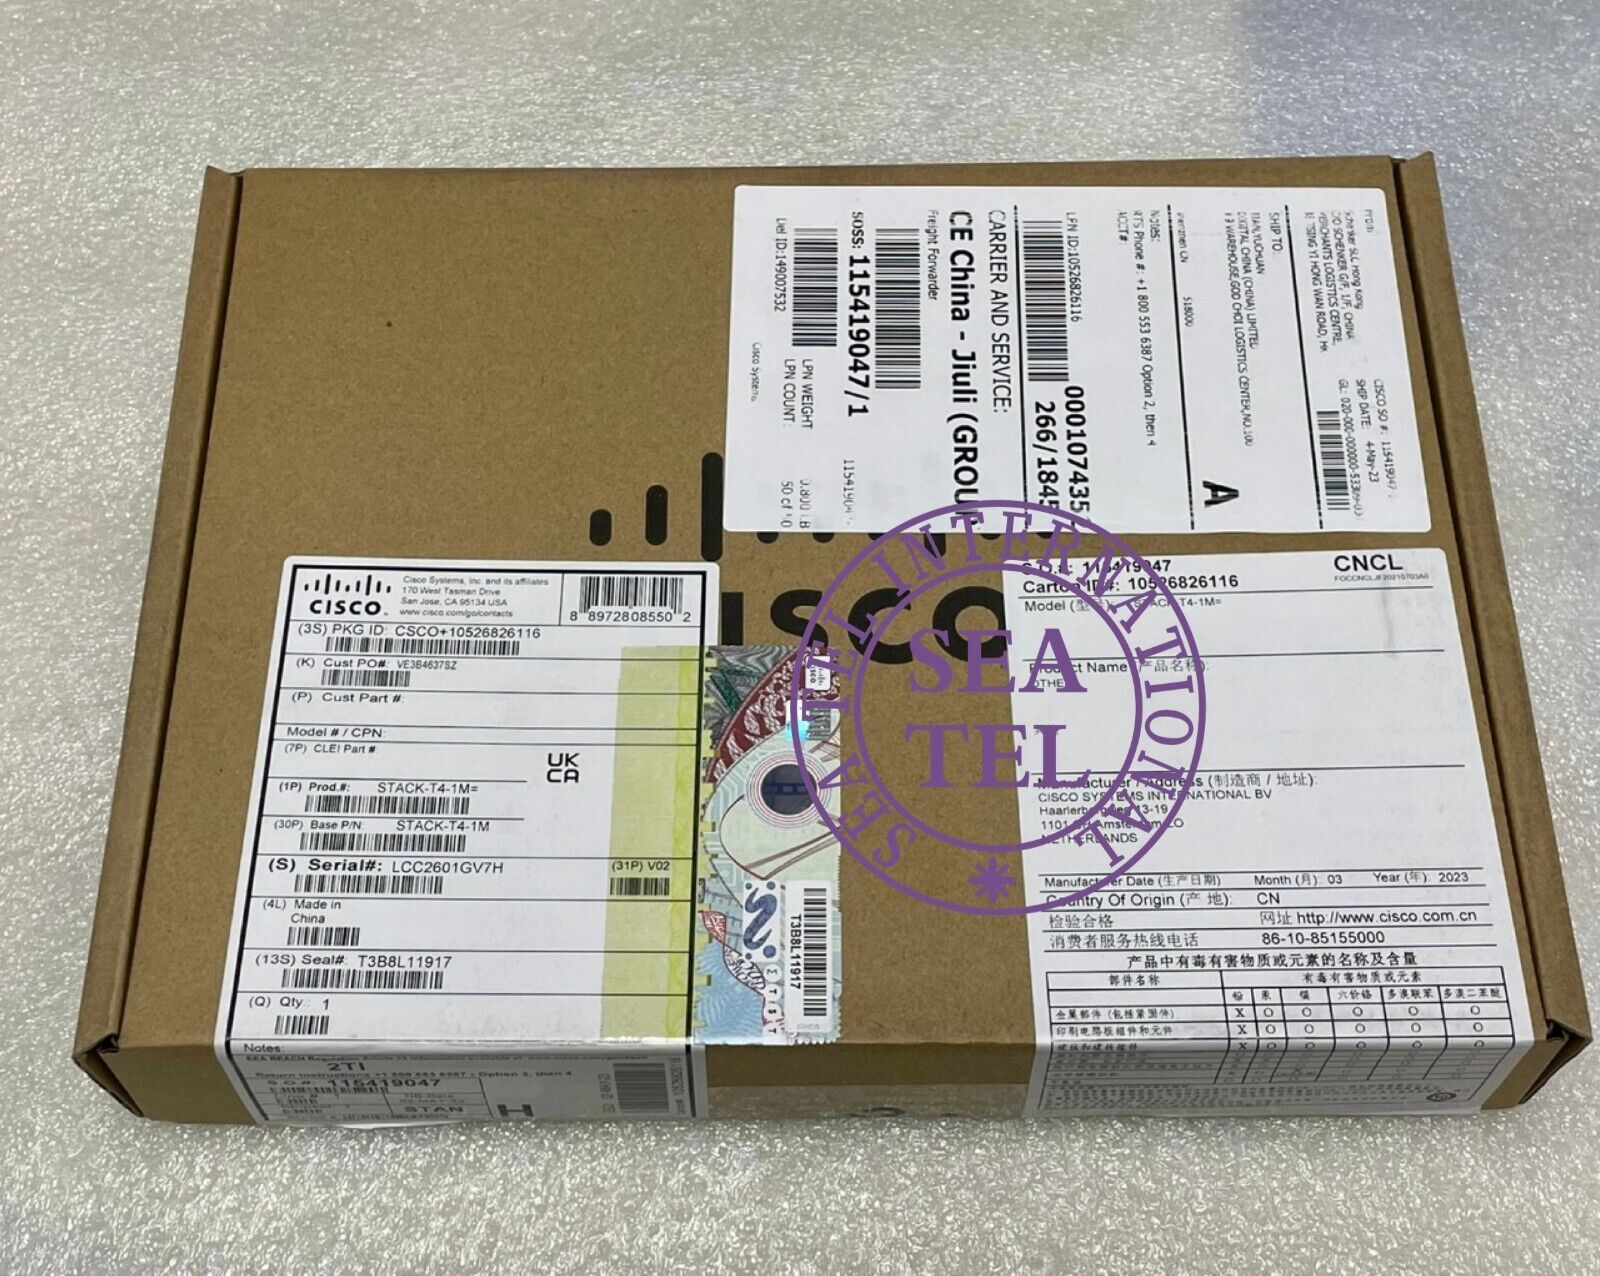 STACK-T4-1M Stacking Cable for Cisco C9200 series NEW SEALED I FEDEX P